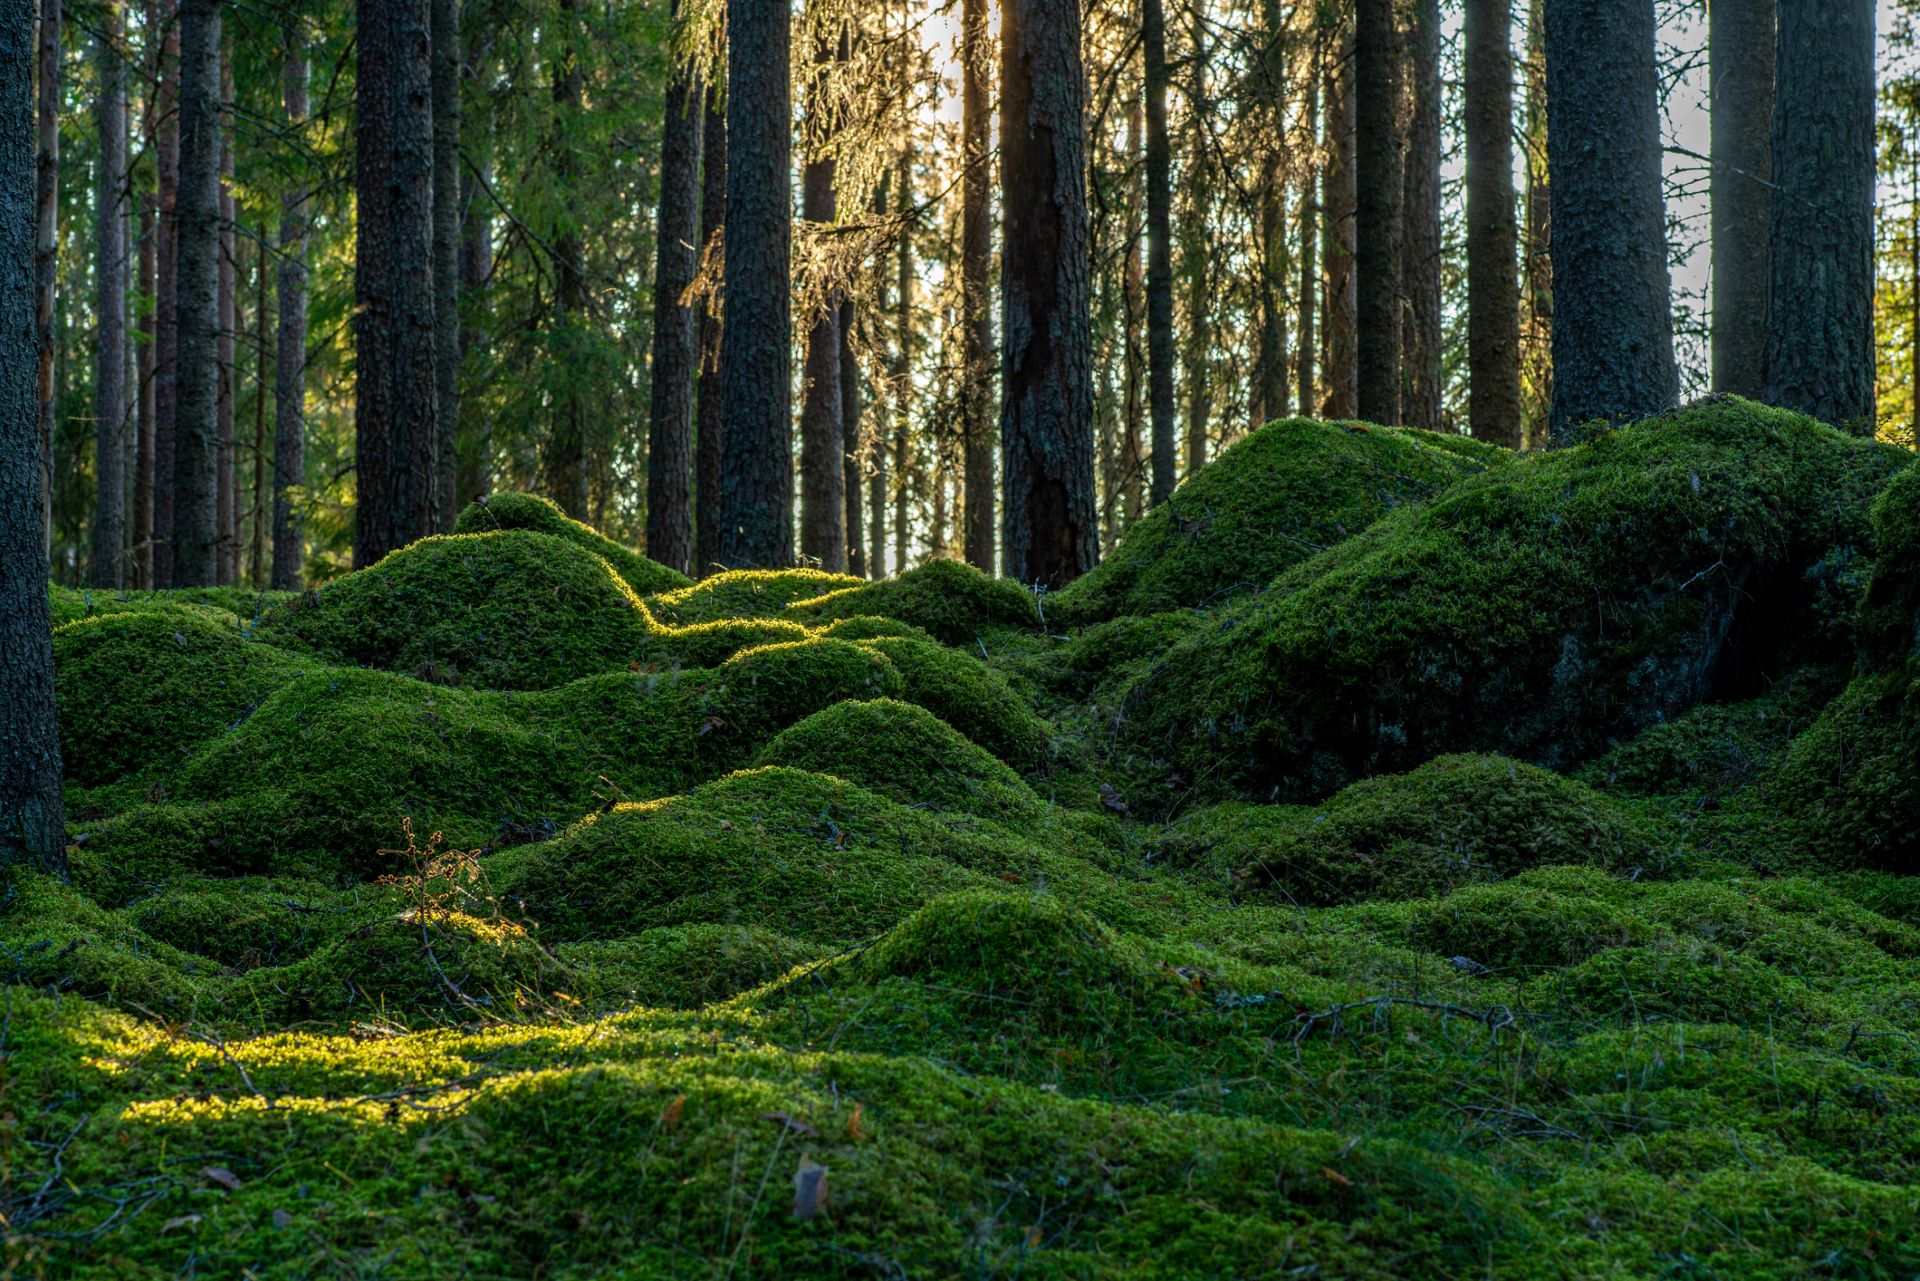 Researchers utterly astounded by complex power of moss